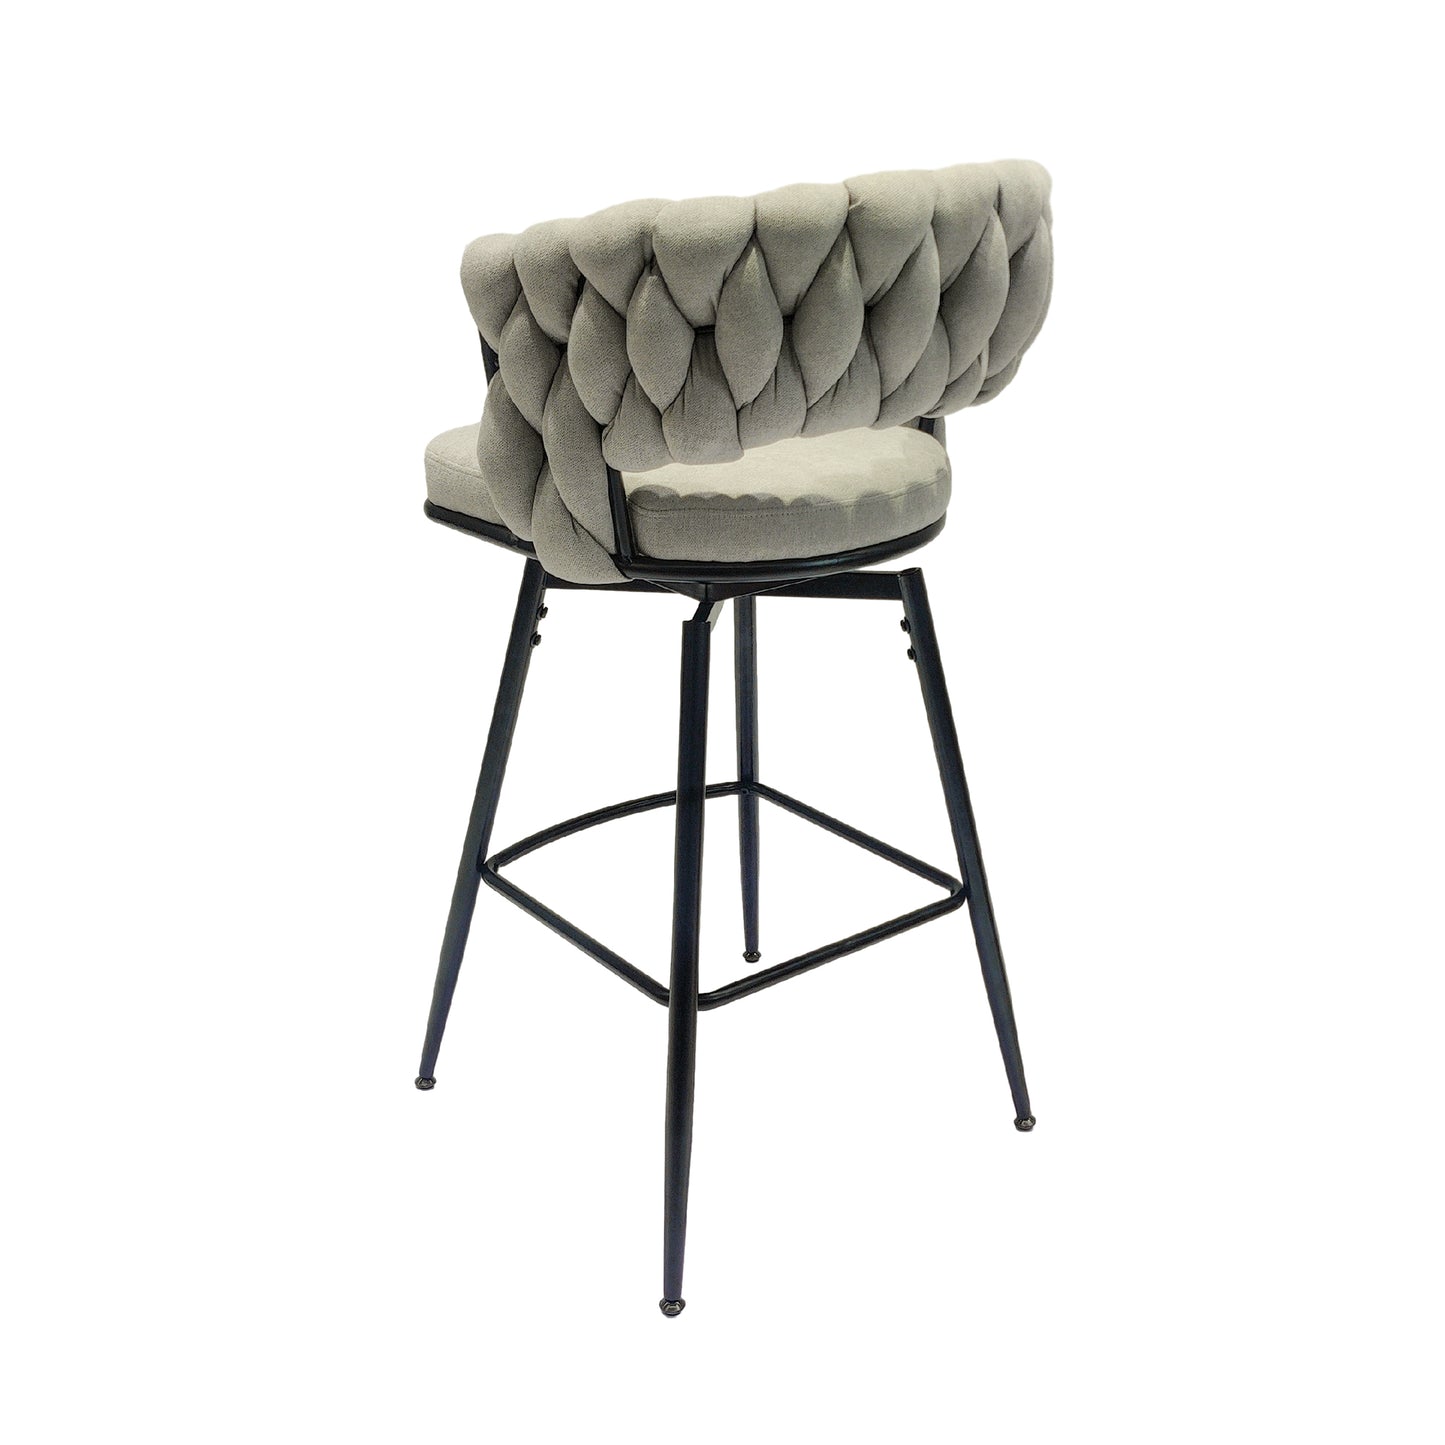 1st Choice Luxurious Grey Linen Swivel Bar Stools with Back Footrest